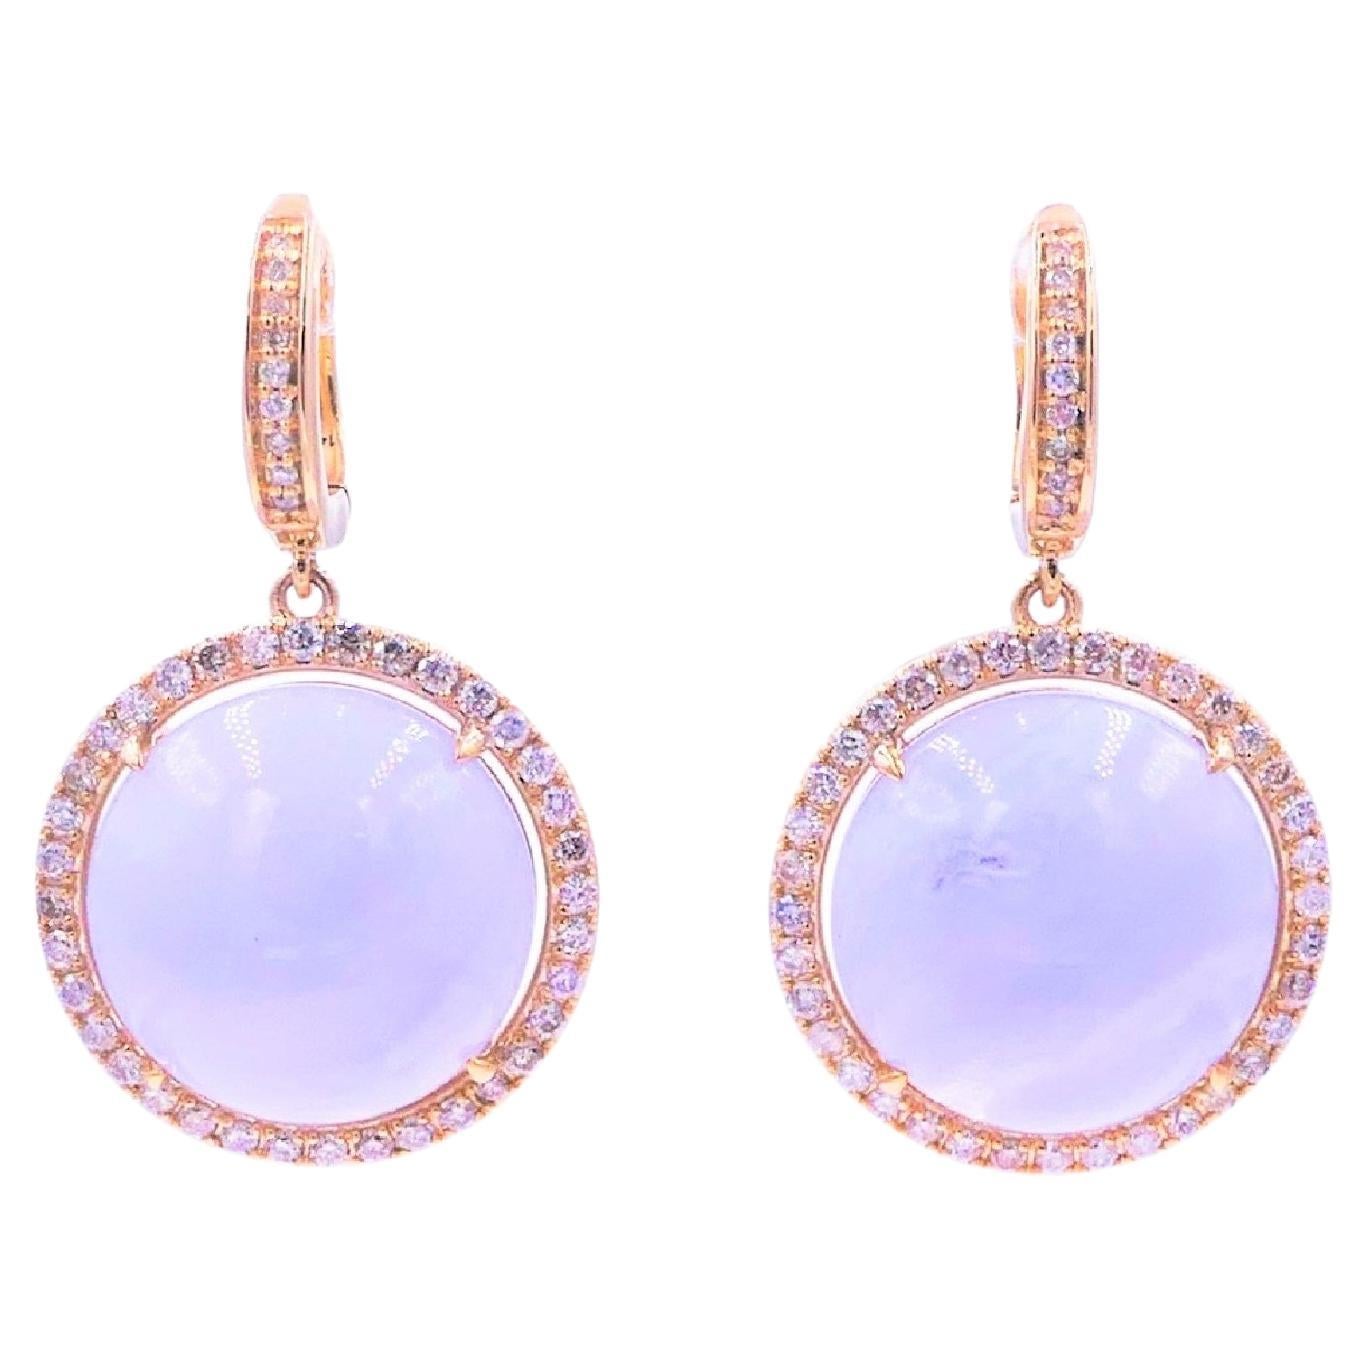 Lavender Purple Lace Chalcedony Round Cabochon Diamond Halo 14K Gold Earrings
14 Karat Yellow Gold
2.00 CT Diamonds
Lavender Purple Lace Chalcedony Cabochon Gemstones

Important Information:
Please note that this item will take 2-4 weeks to deliver